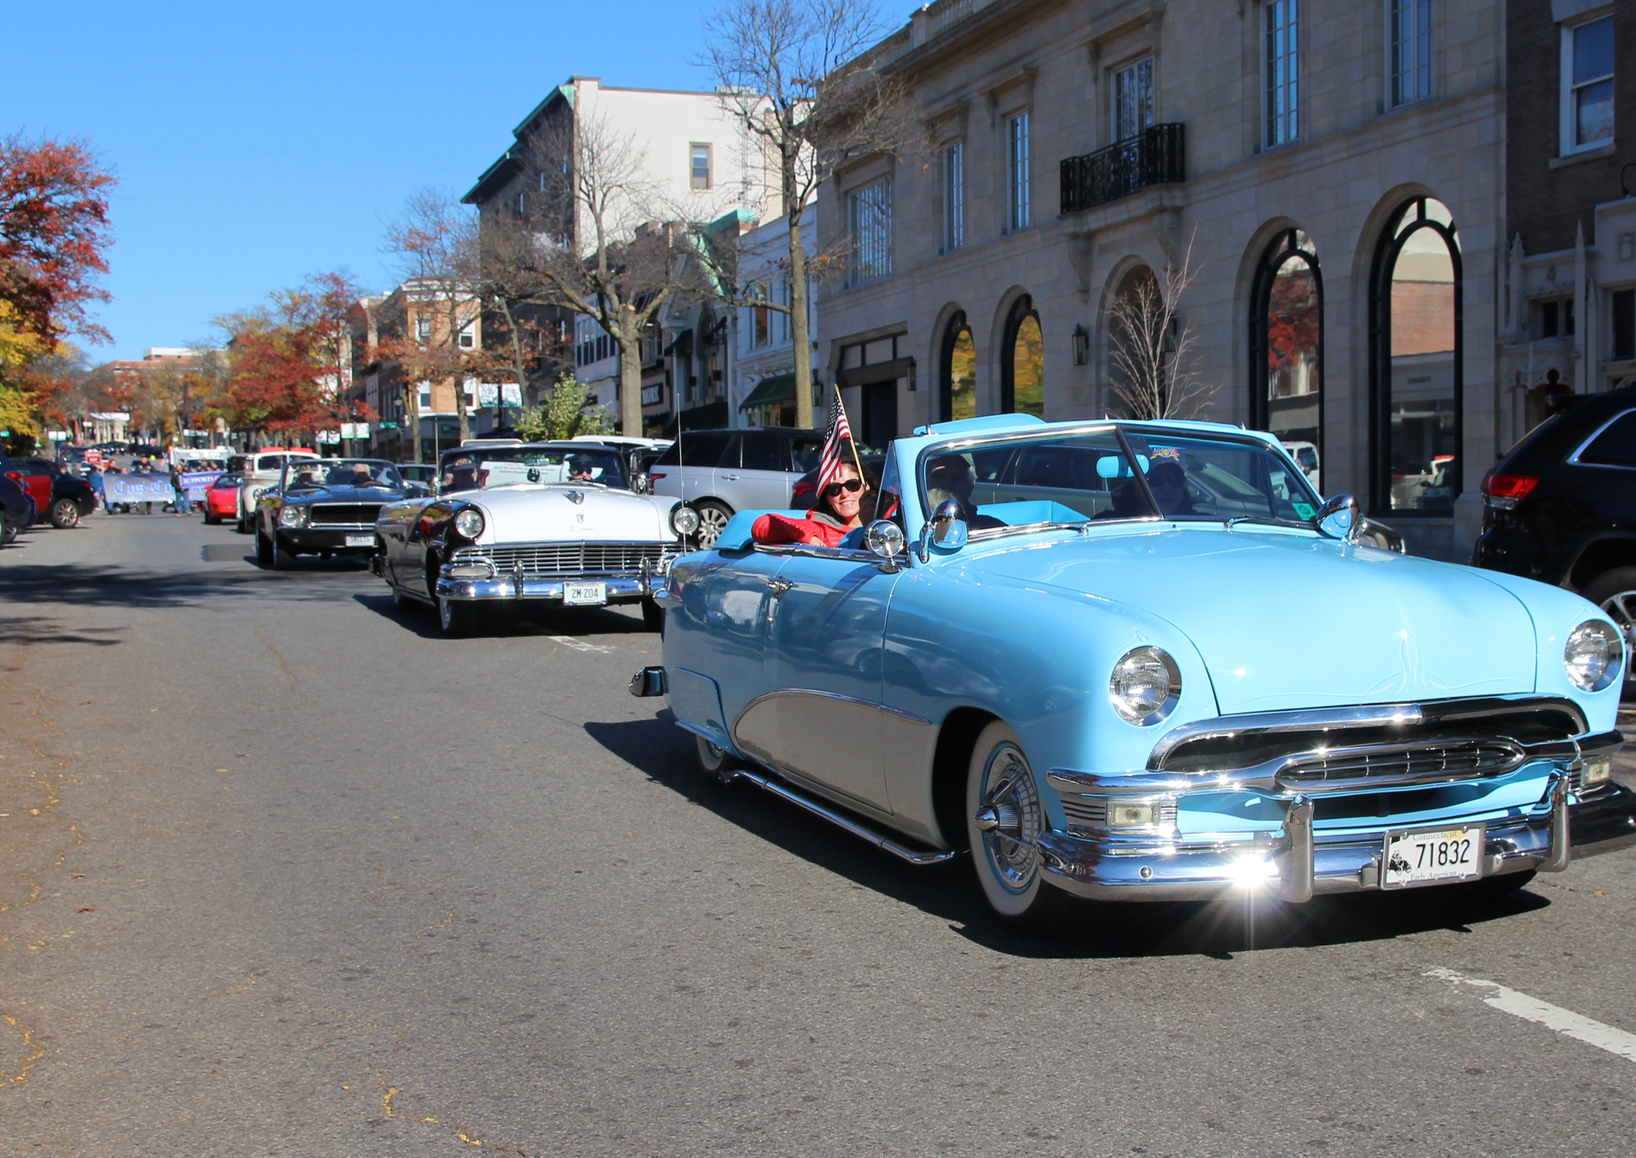 Riding in antique cars, many veterans moved along Greenwich Avenue, past Greenwich's impressive collection of monuments. Nov 11, 2018 Photo: Leslie Yager